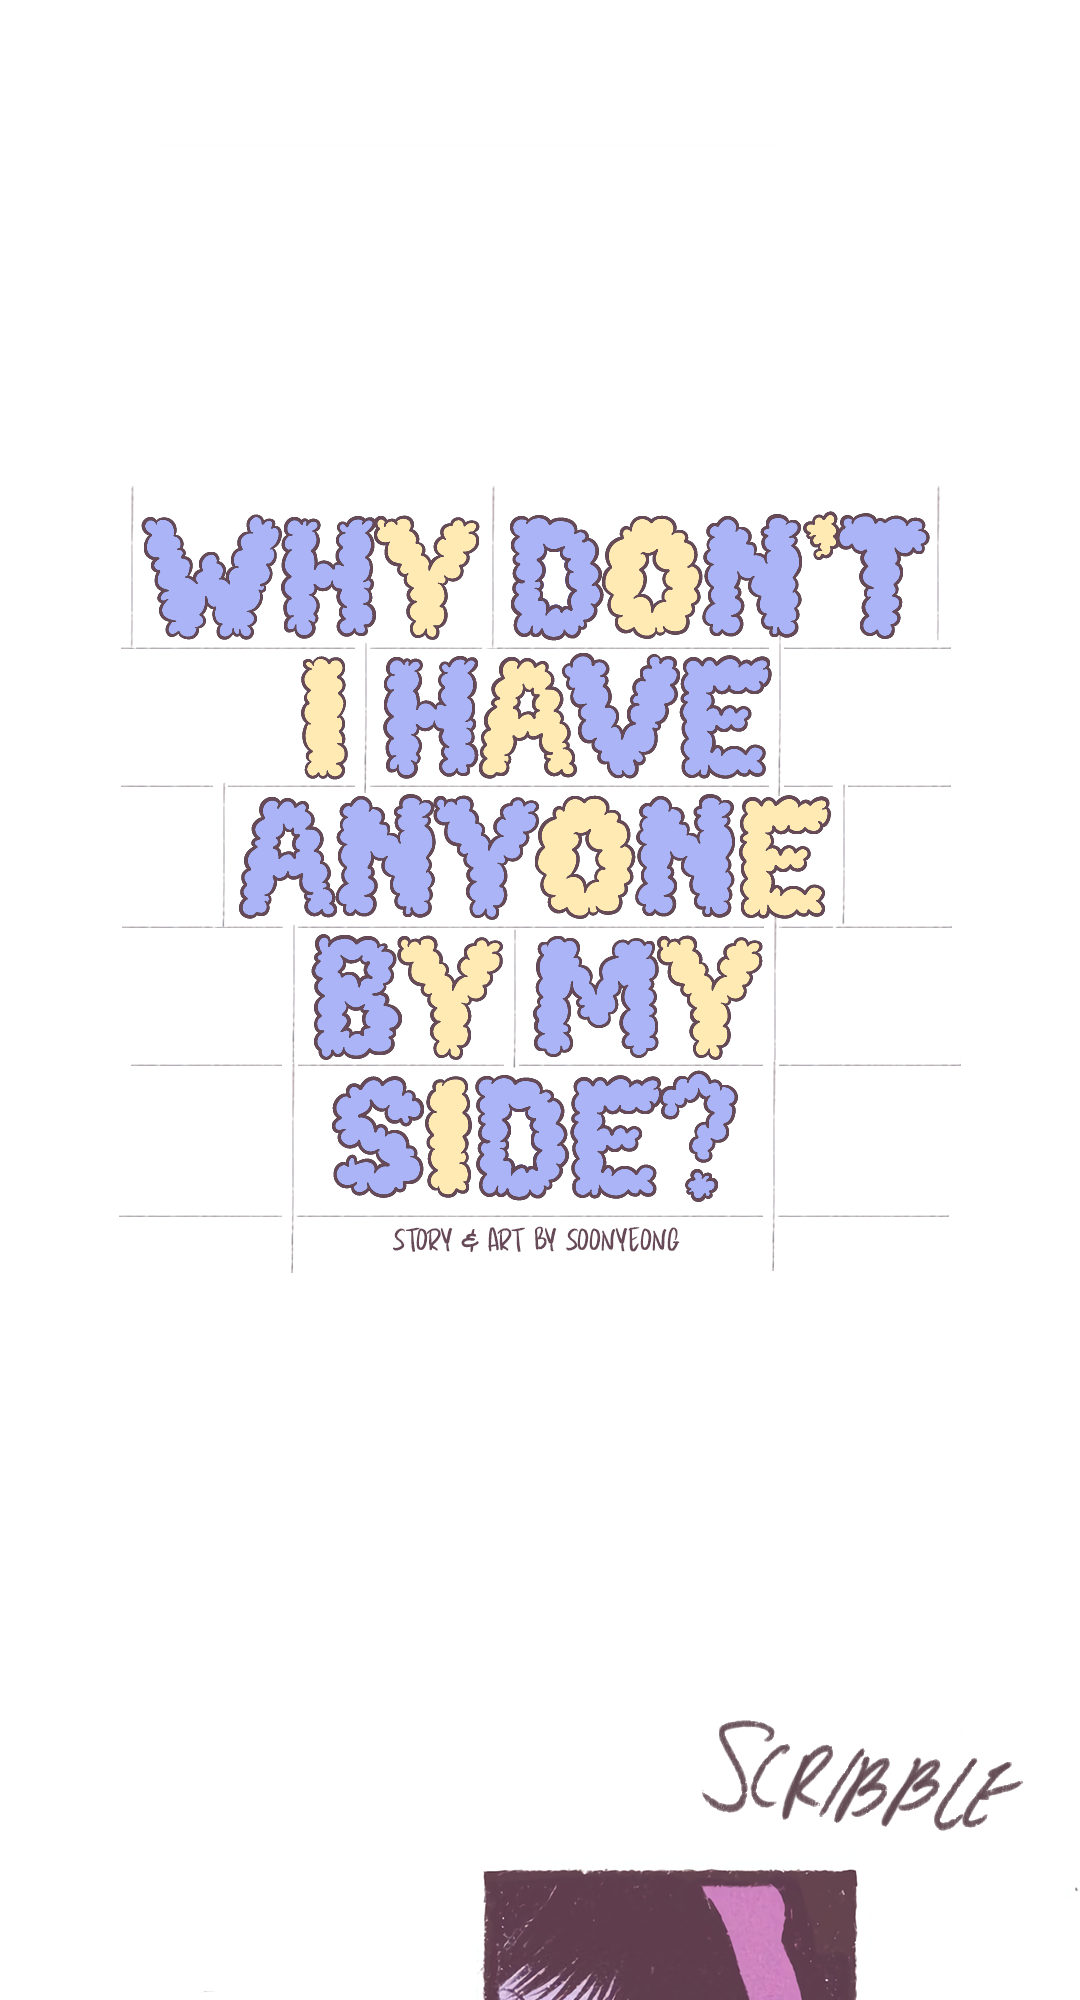 Why Don't I Have Anyone By My Side? Chapter 3 - Picture 3